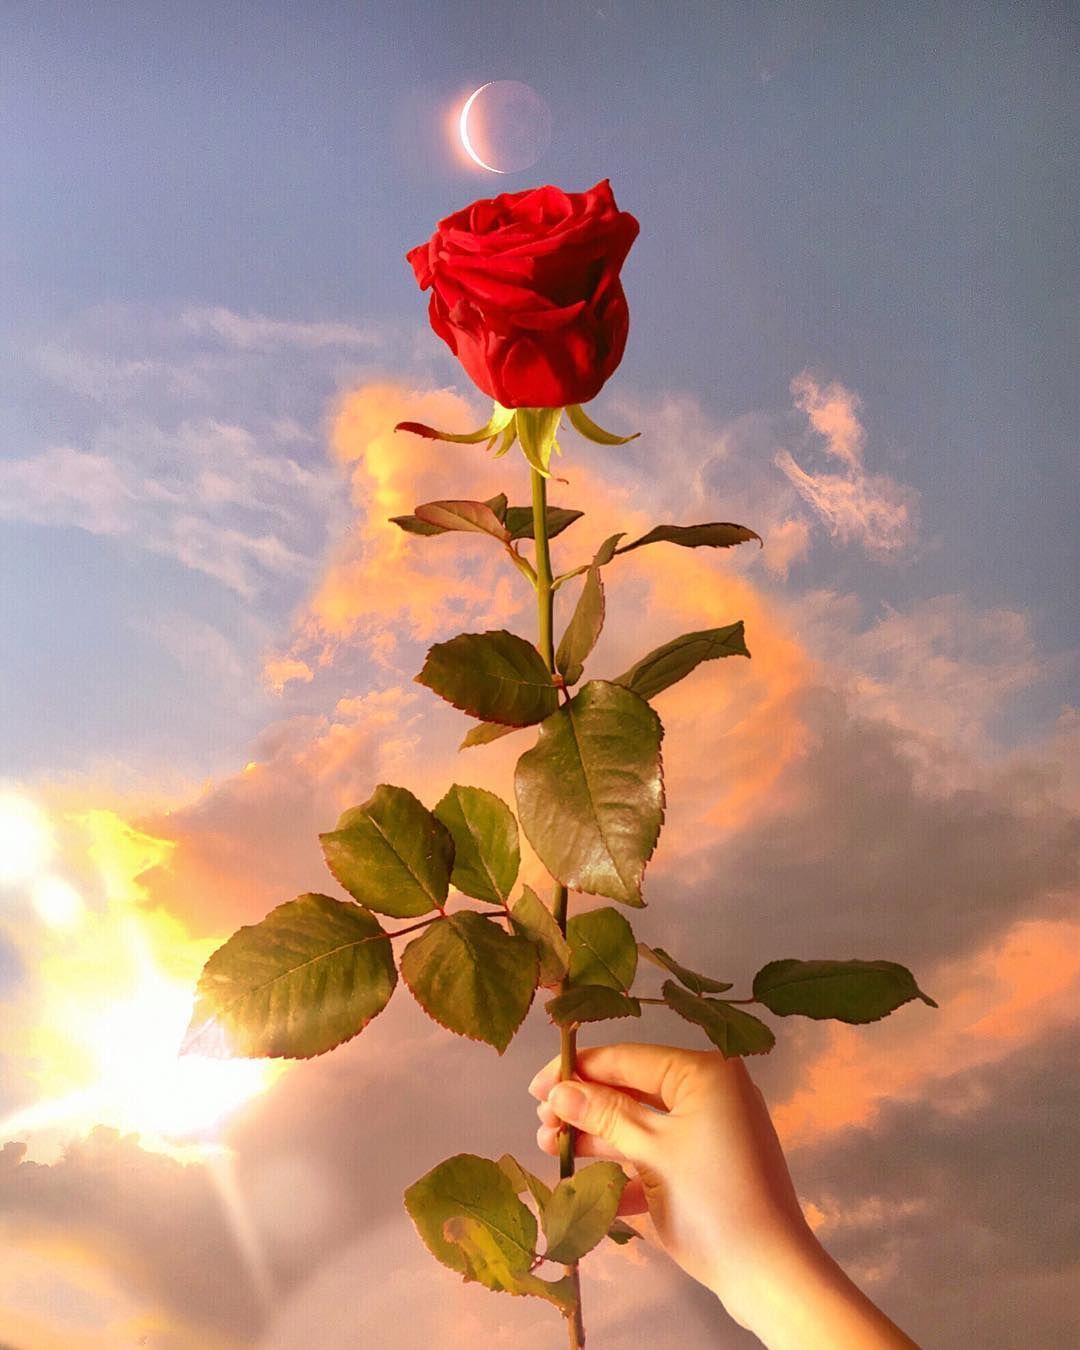 Of Acts Art on Twitter. Aesthetic roses, Nature photography, Rose wallpaper